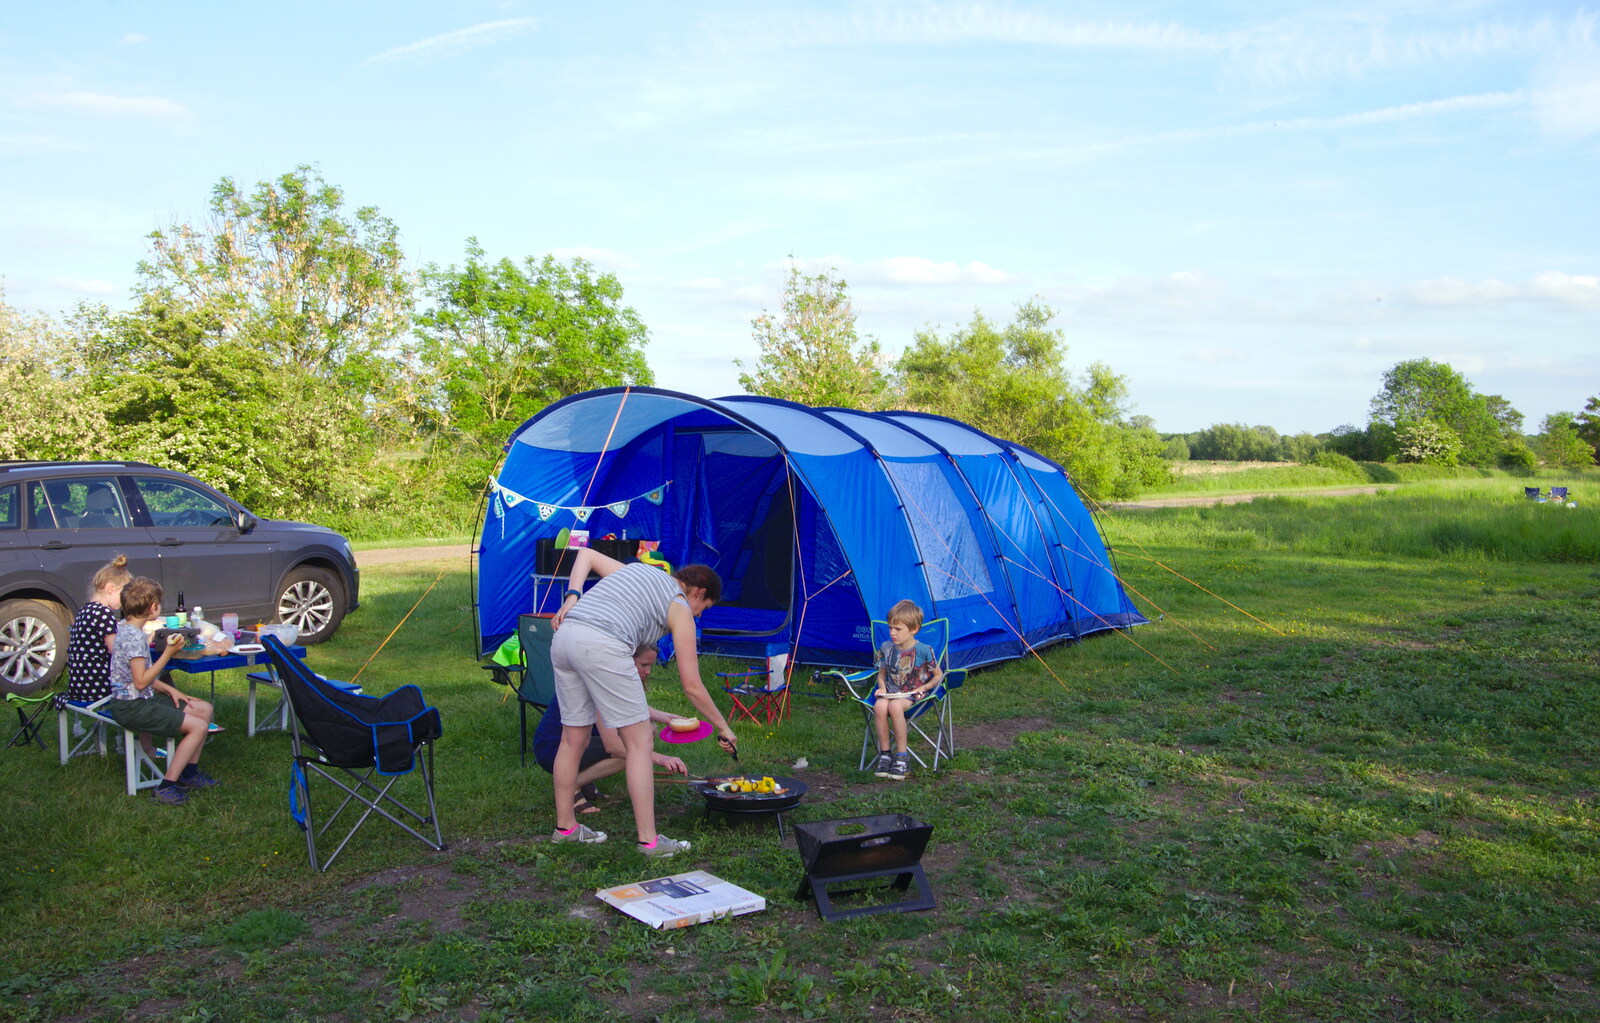 Allyson's pitch from Camping at Three Rivers, Geldeston, Norfolk - 1st June 2019